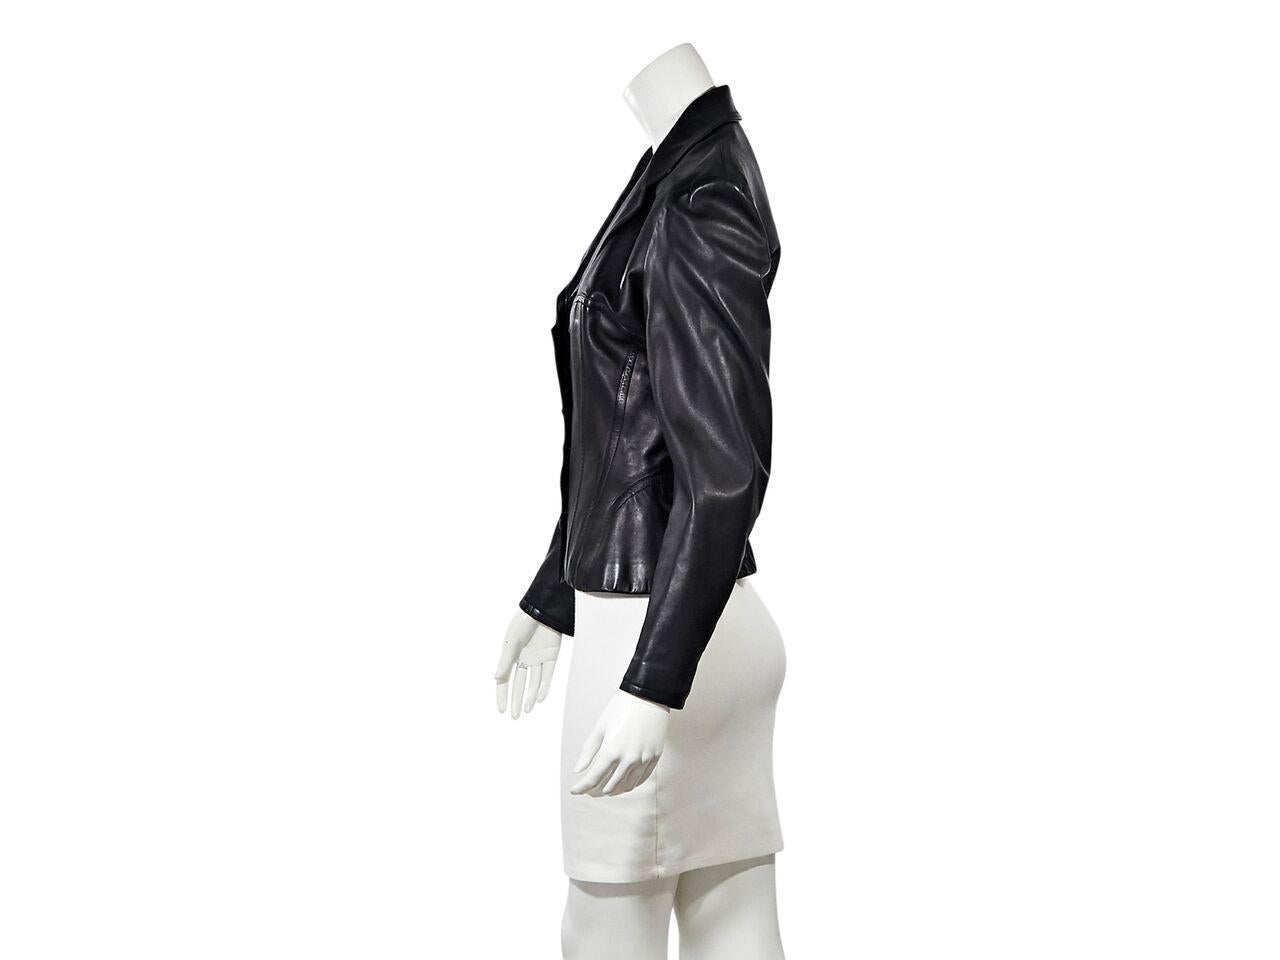 Product details:  Black leather tailored jacket by Alaia.  Circa the 1980s.  Notched lapel.  Long sleeves.  Button-front closure.  Faux corset bodice.  Silvertone hardware.  33